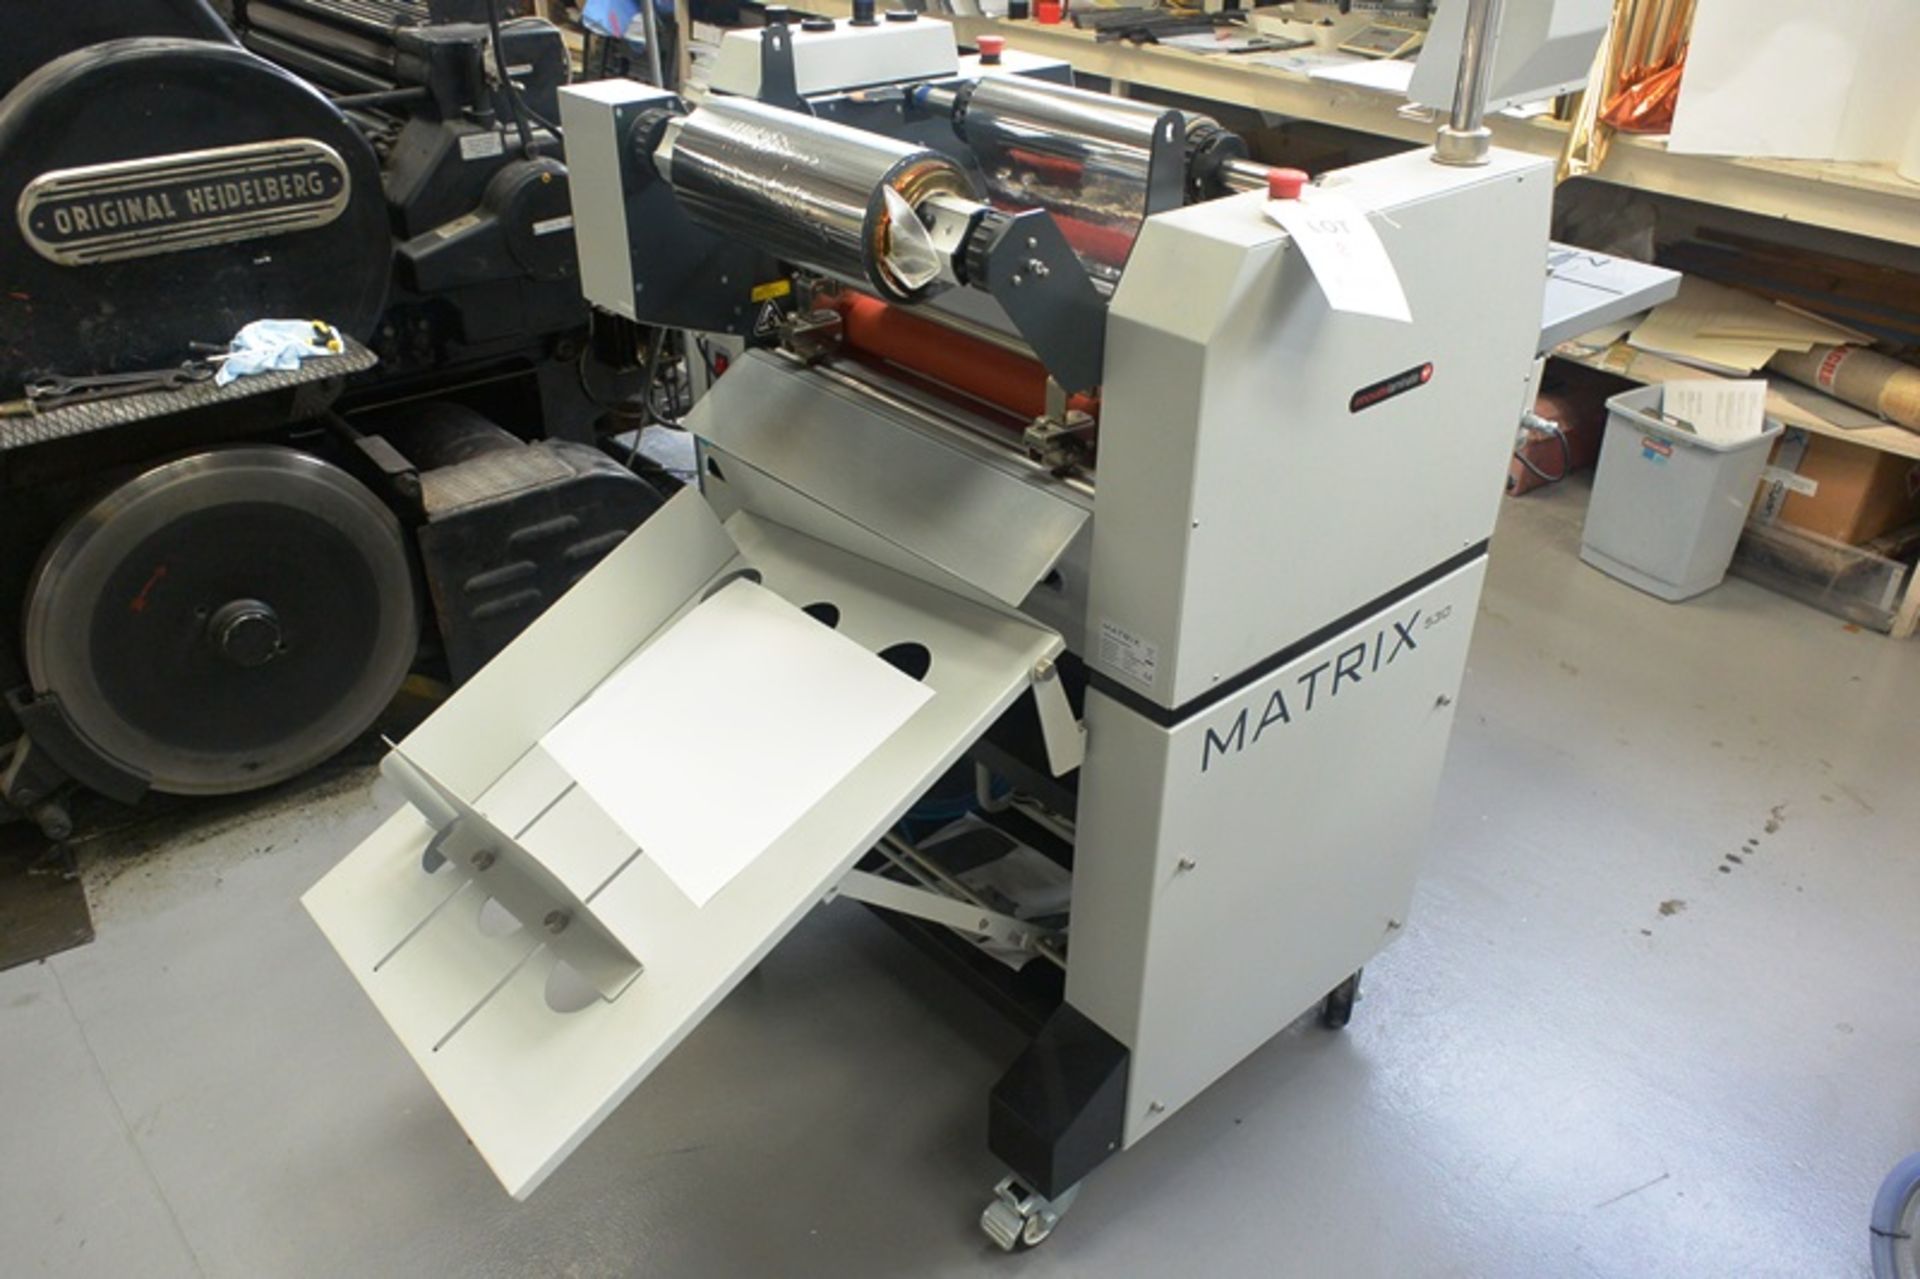 Matrix 530 reel feed continuous single sided laminating machine, model MX-530P, serial no. 1312- - Image 2 of 7